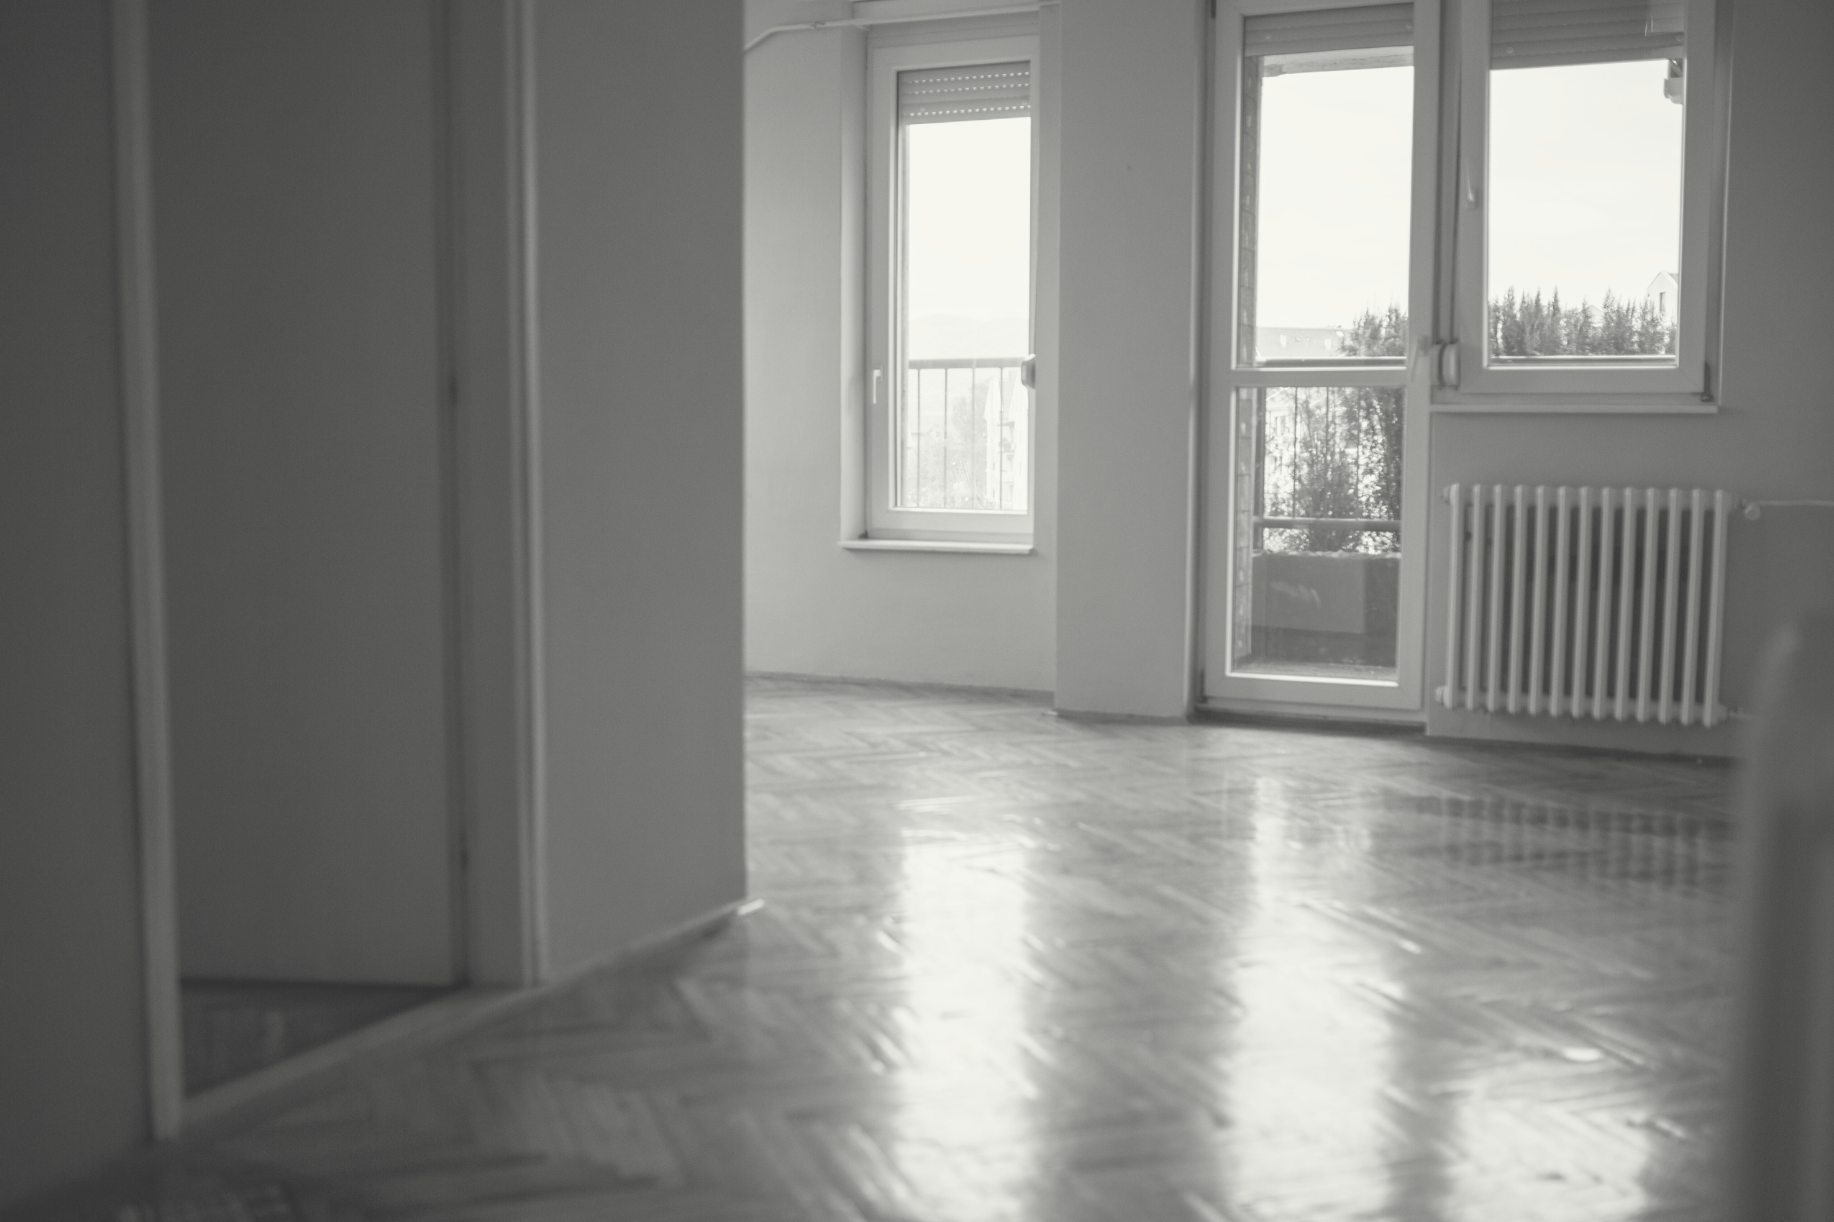 An empty apartment. The photo is taken from the entrance of a room with a view of the apartment’s balcony and two windows. The hardwood floors and walls are bare.